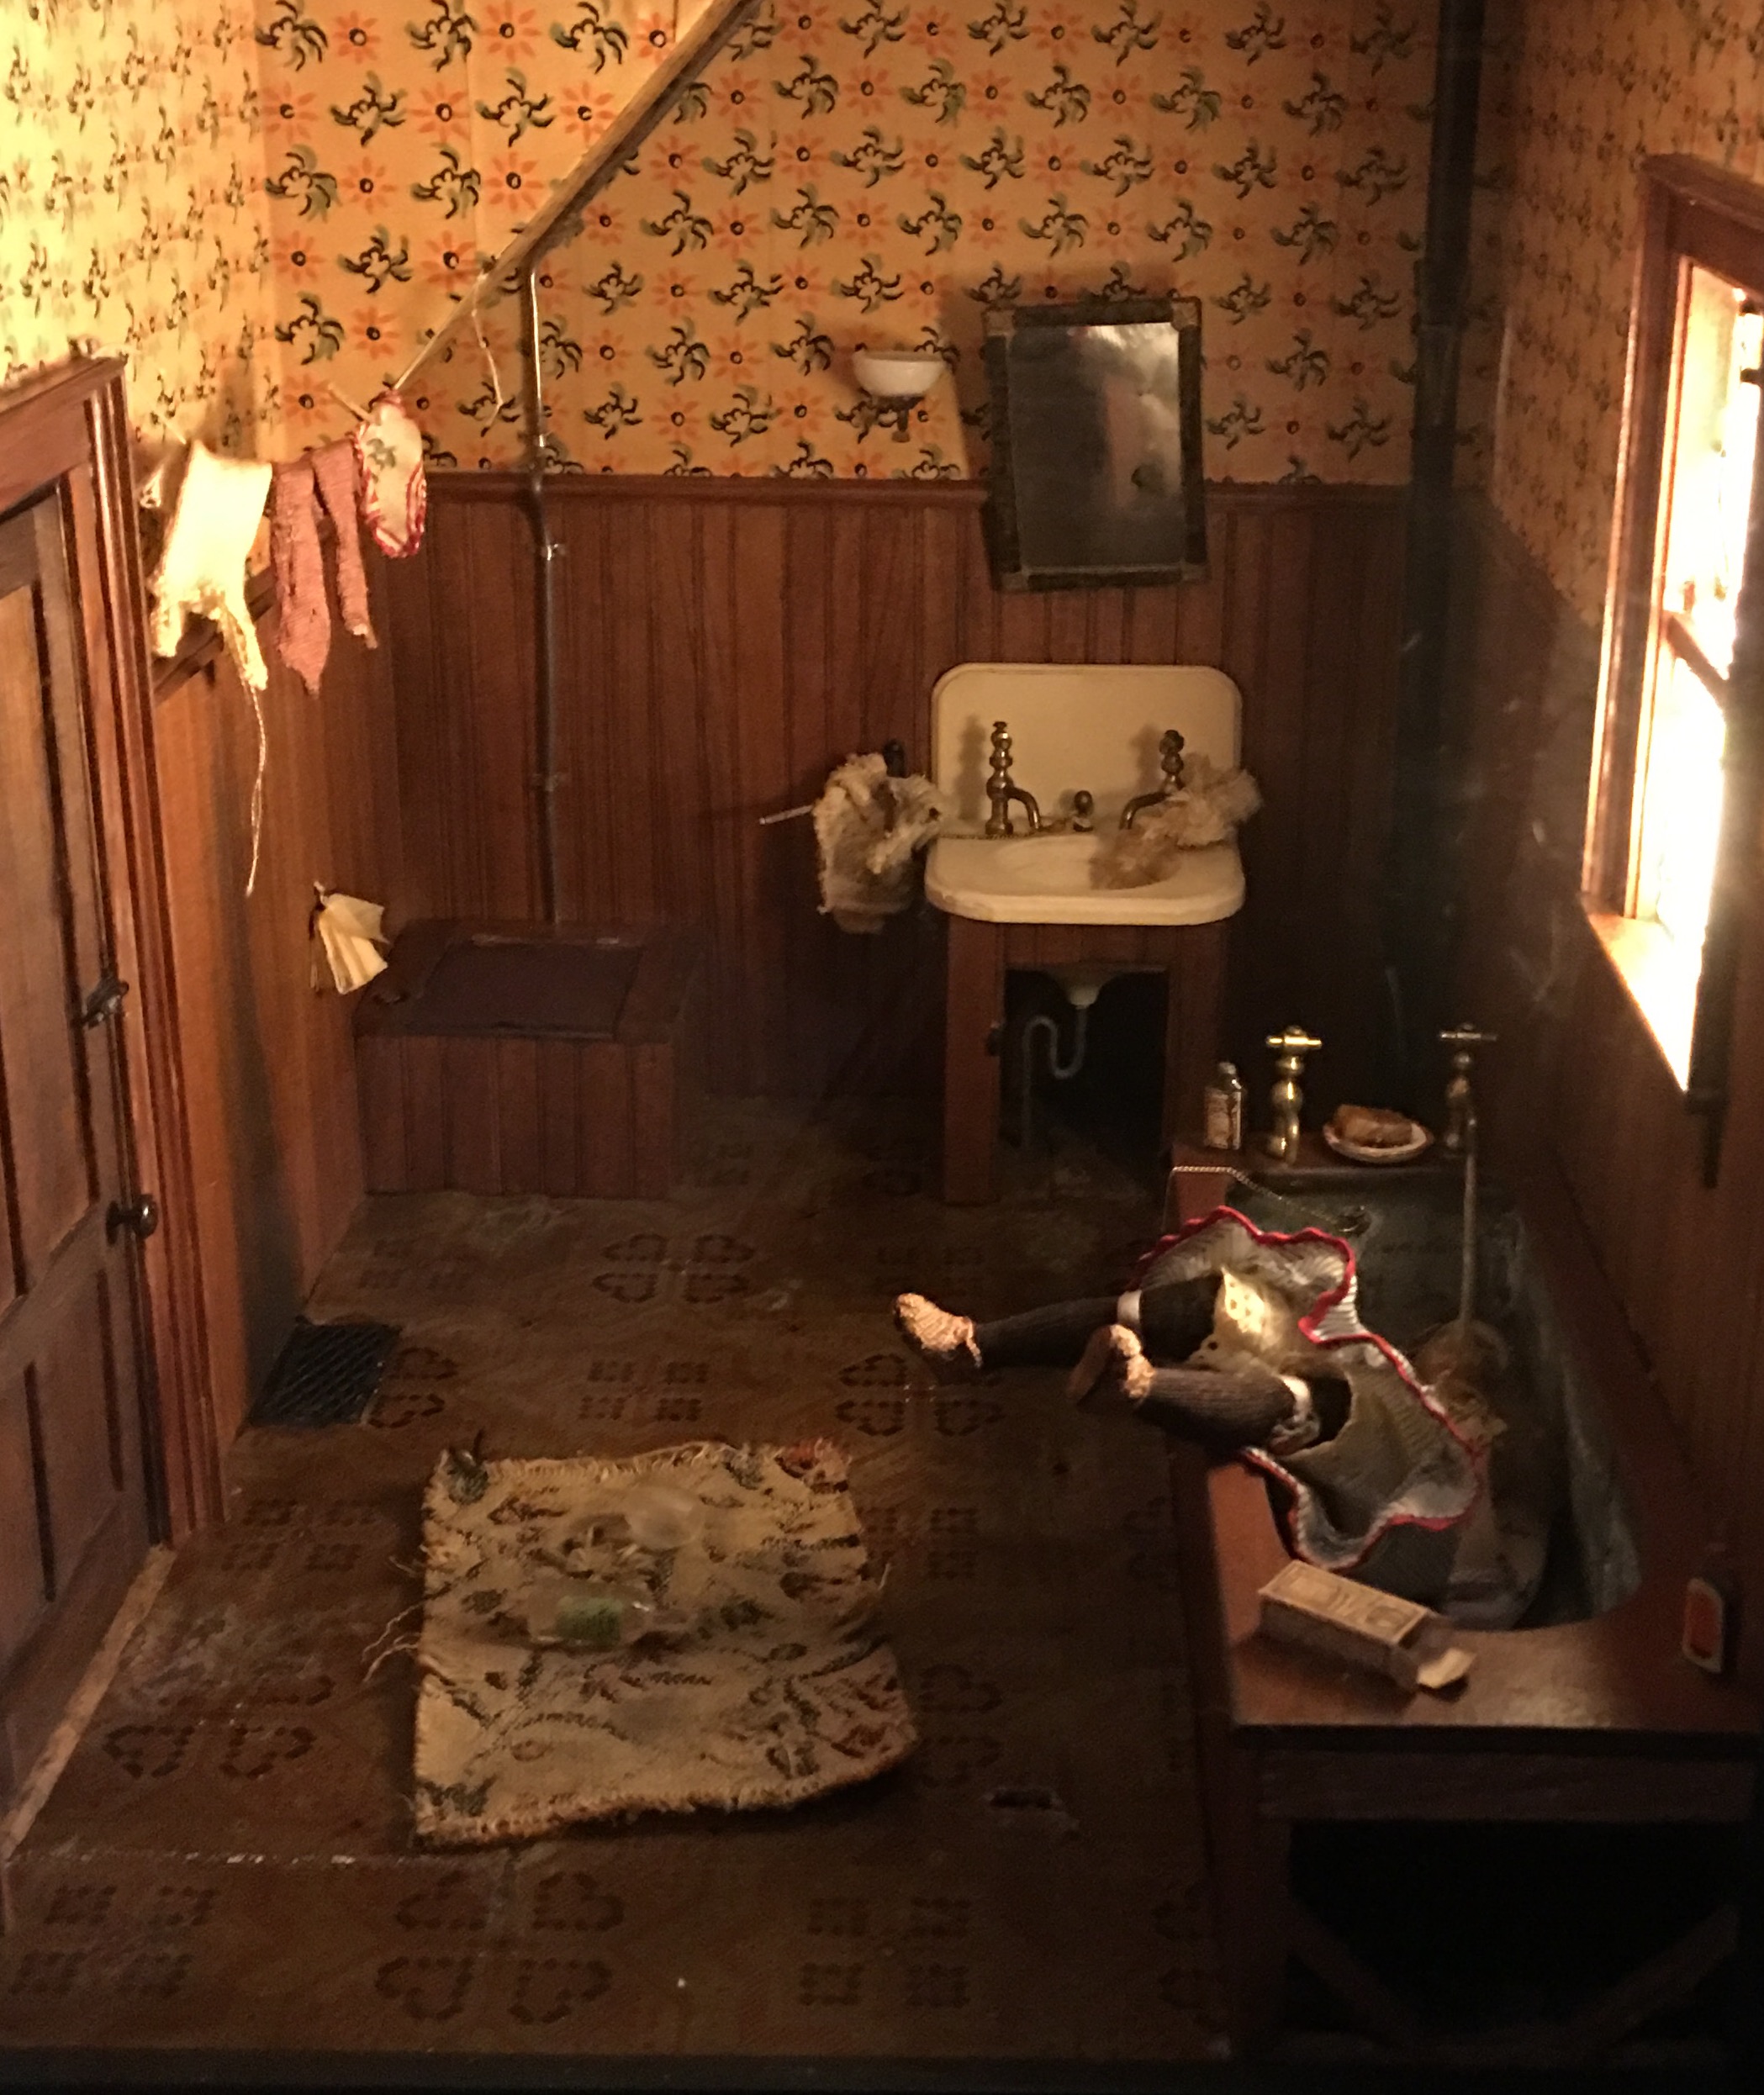 Closeup photo of a nutshell model as if the photographer is in the room. A wallpapered and wood-paneled bathroom with glass and bottle on floor. Doll in bathtub with legs projecting into air.